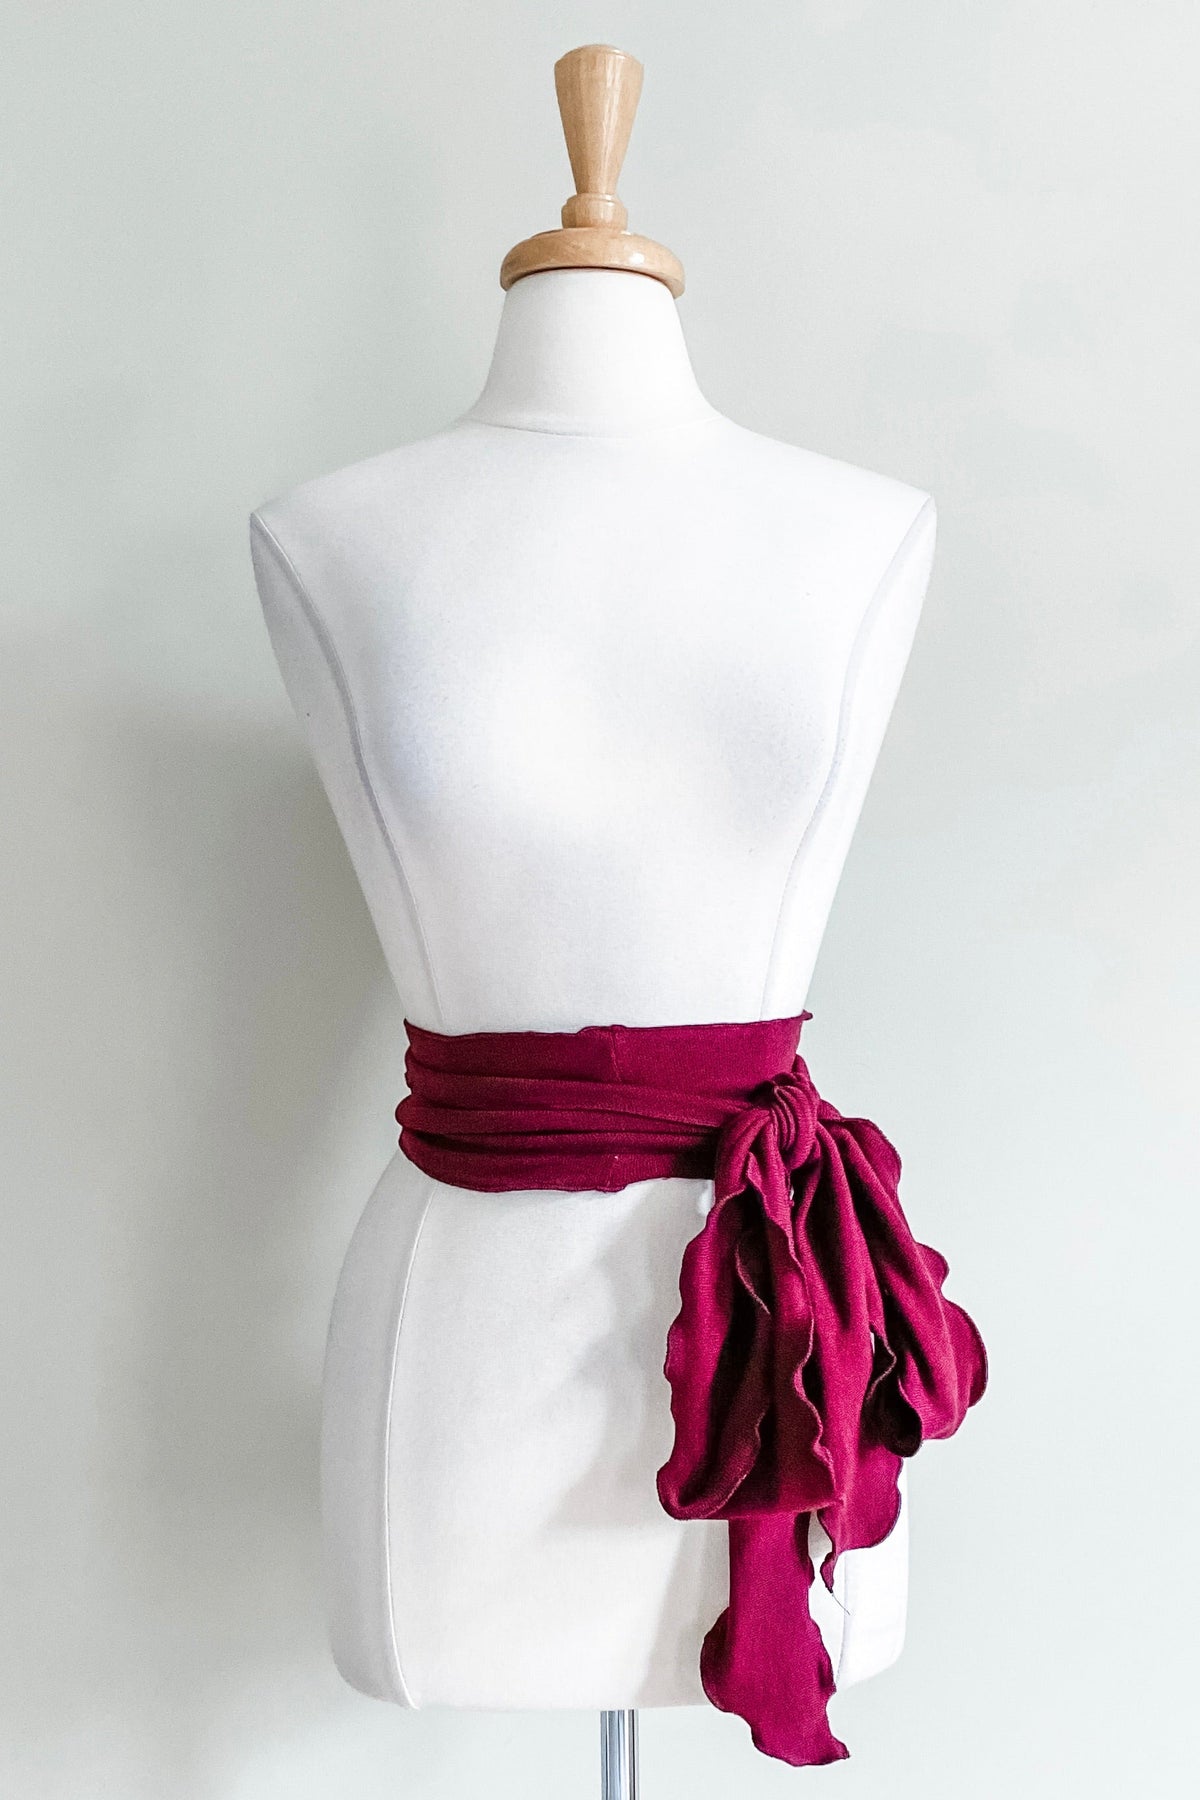 Matching Sash in Oxblood color from Diane Kroe